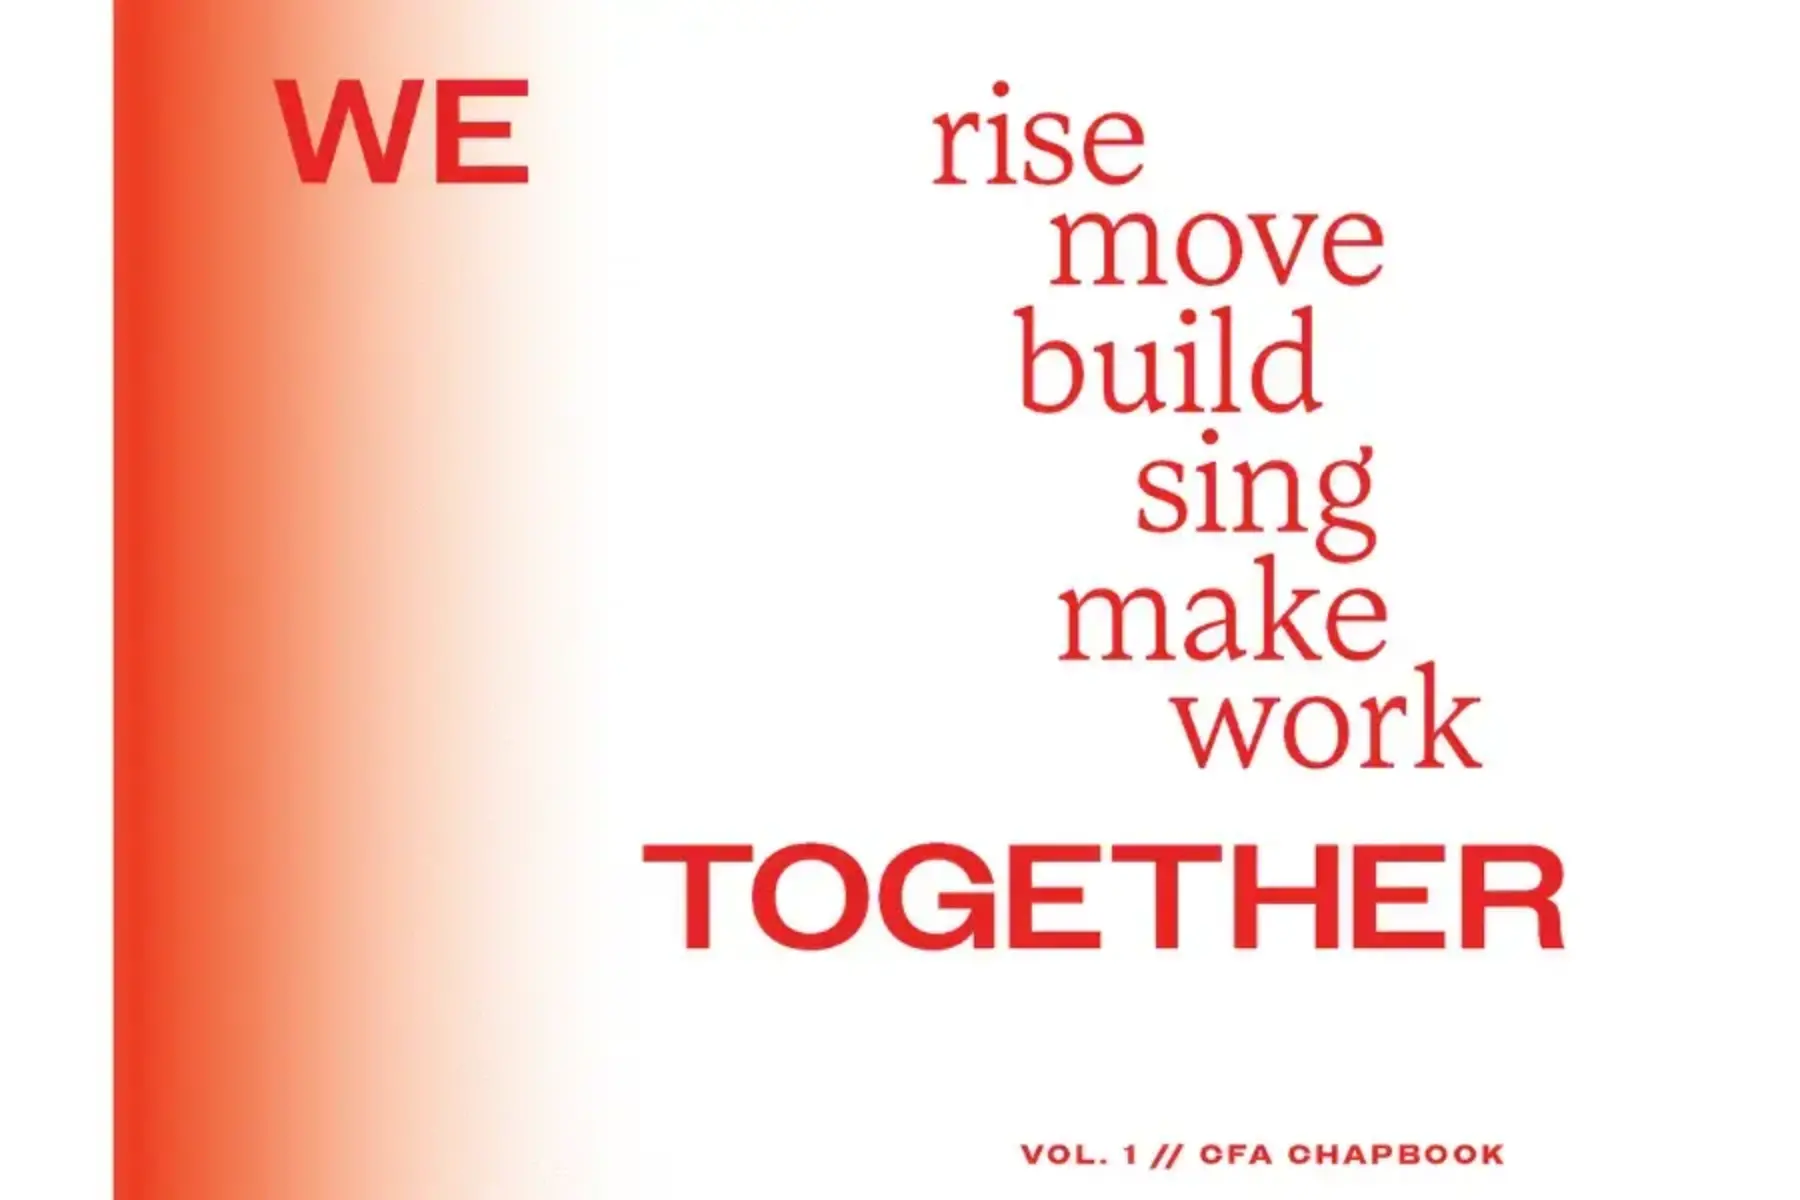 Cover of chapbook. White background with red fading on the left. Large red text across the middle reads We rise move build sing make work together. Vol. 1 // CFA Chapbook